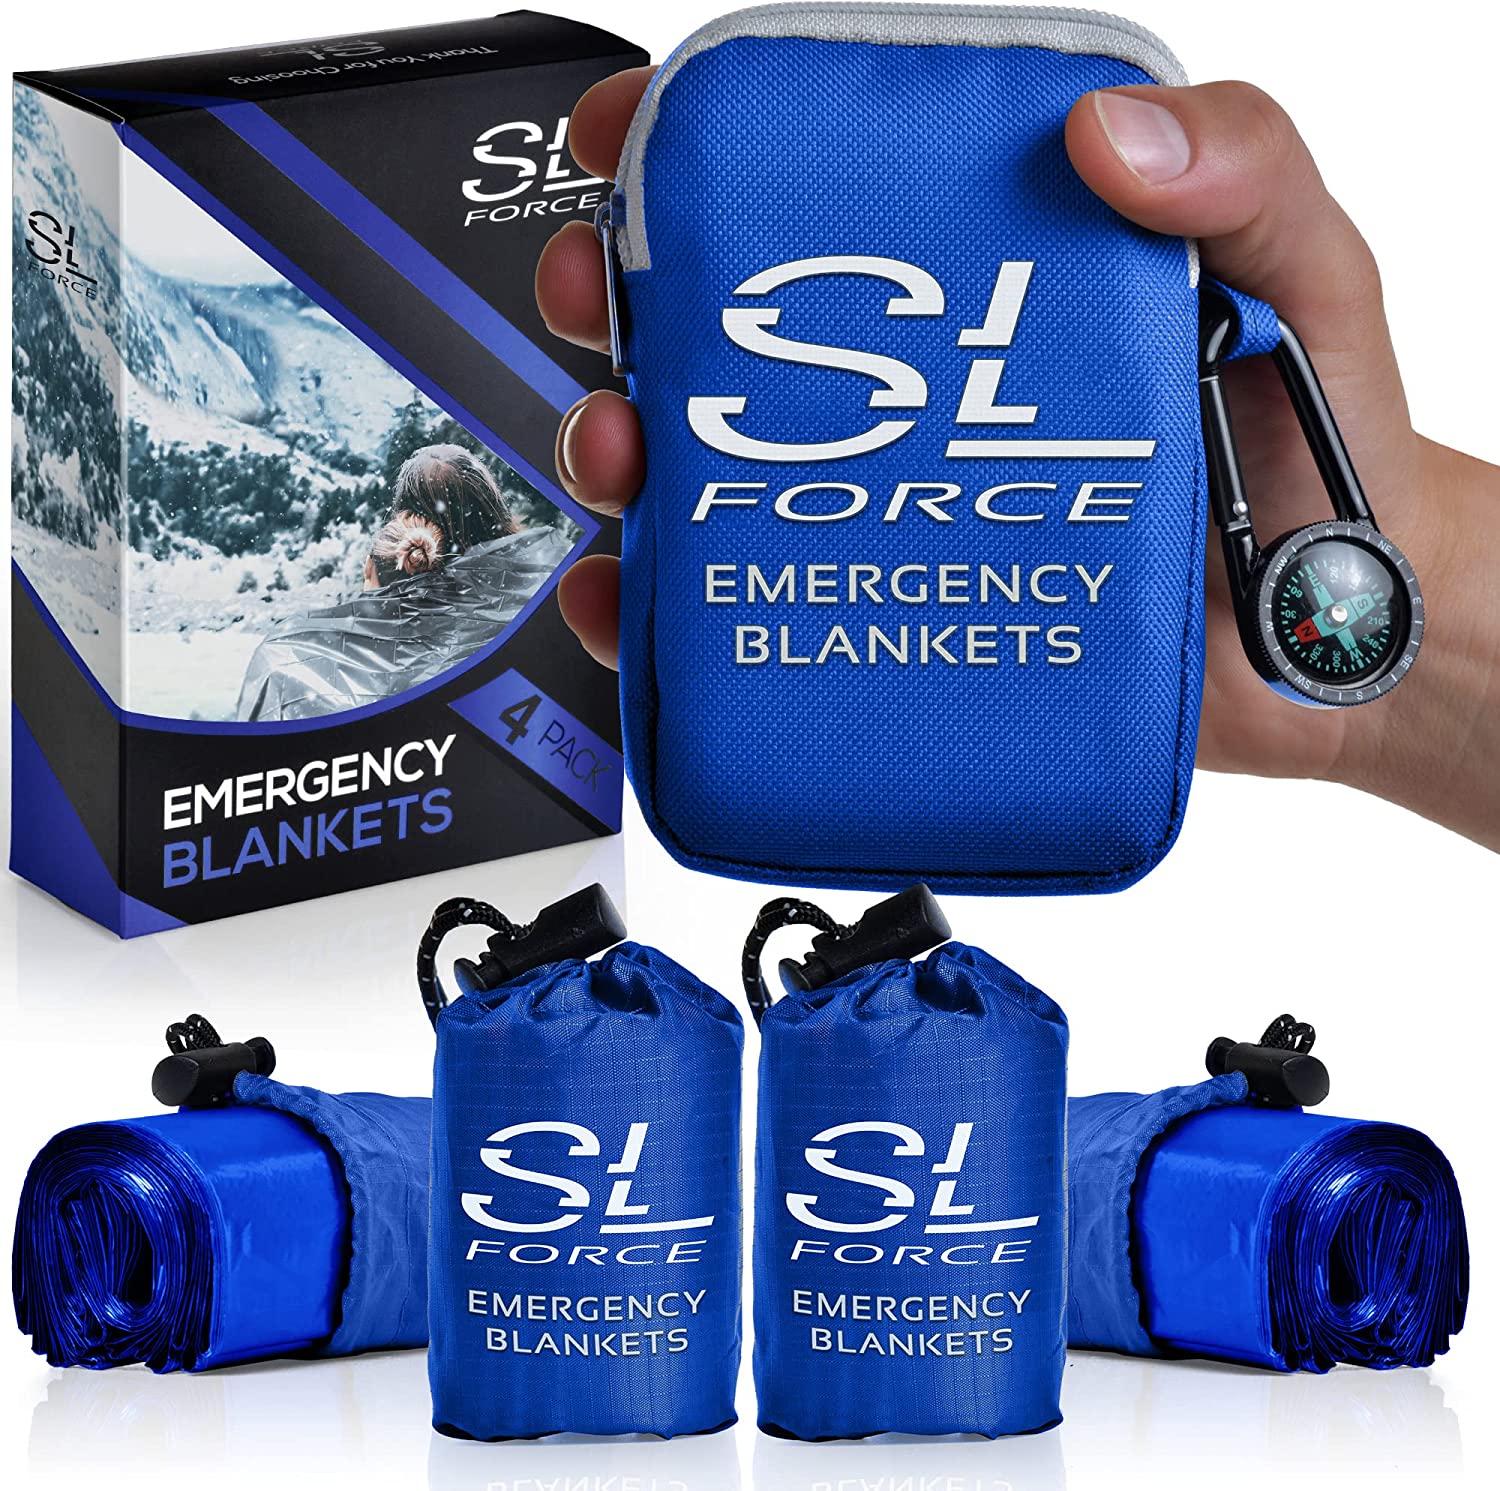 SLFORCE Emergency Blankets for Survival, 4 Pack of Gigantic Space Blanket. Comes with Four Extra-Large Mylar Blankets, Compass, and Zipper Bag. The Best Thermal Space Blankets Survival Heavy Duty